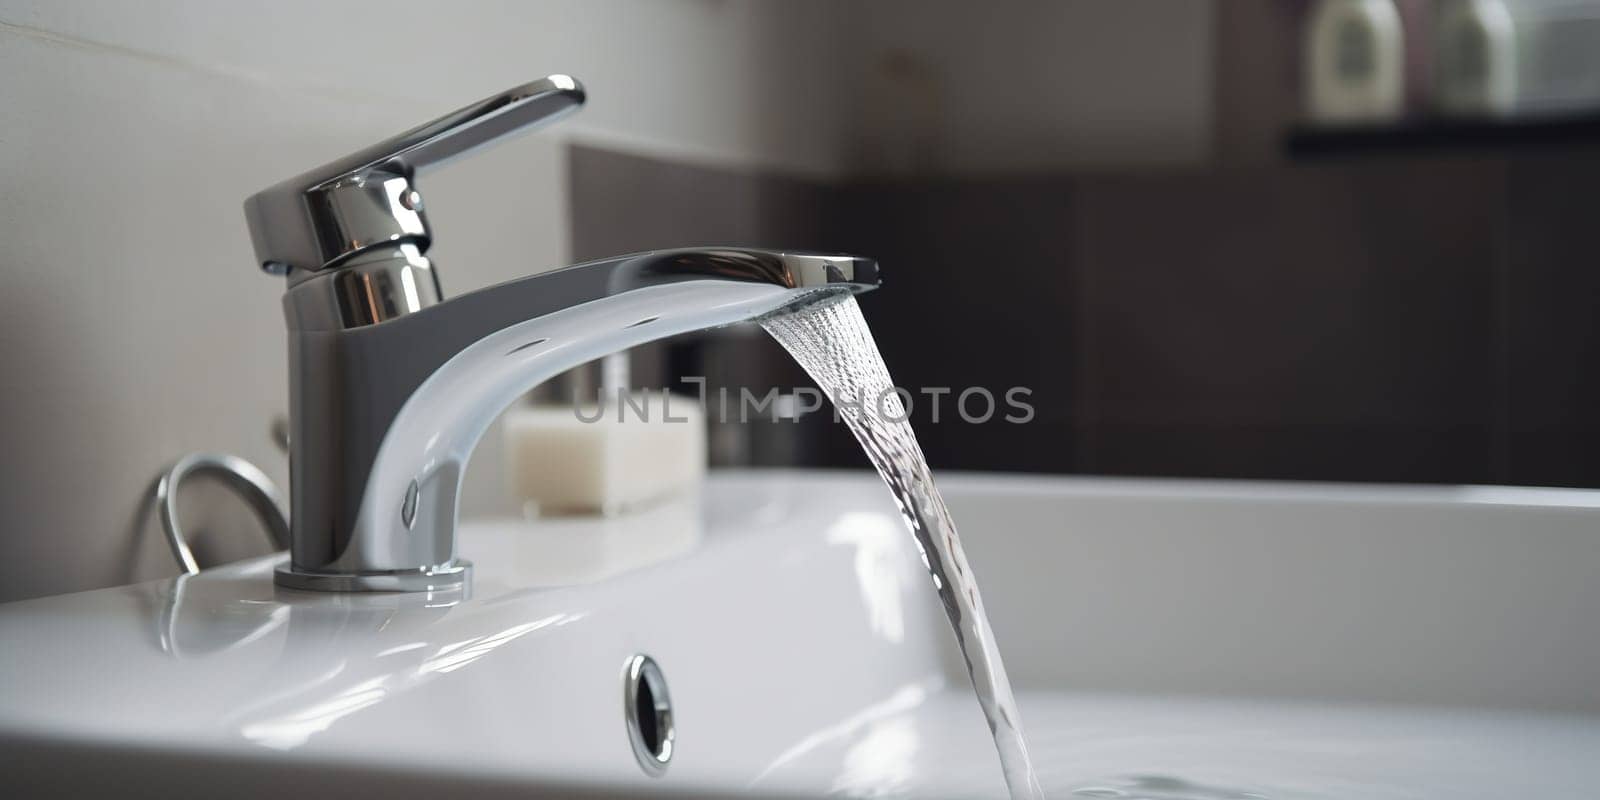 Pouring water into sink using mixer in bathroom, captured in closeup.